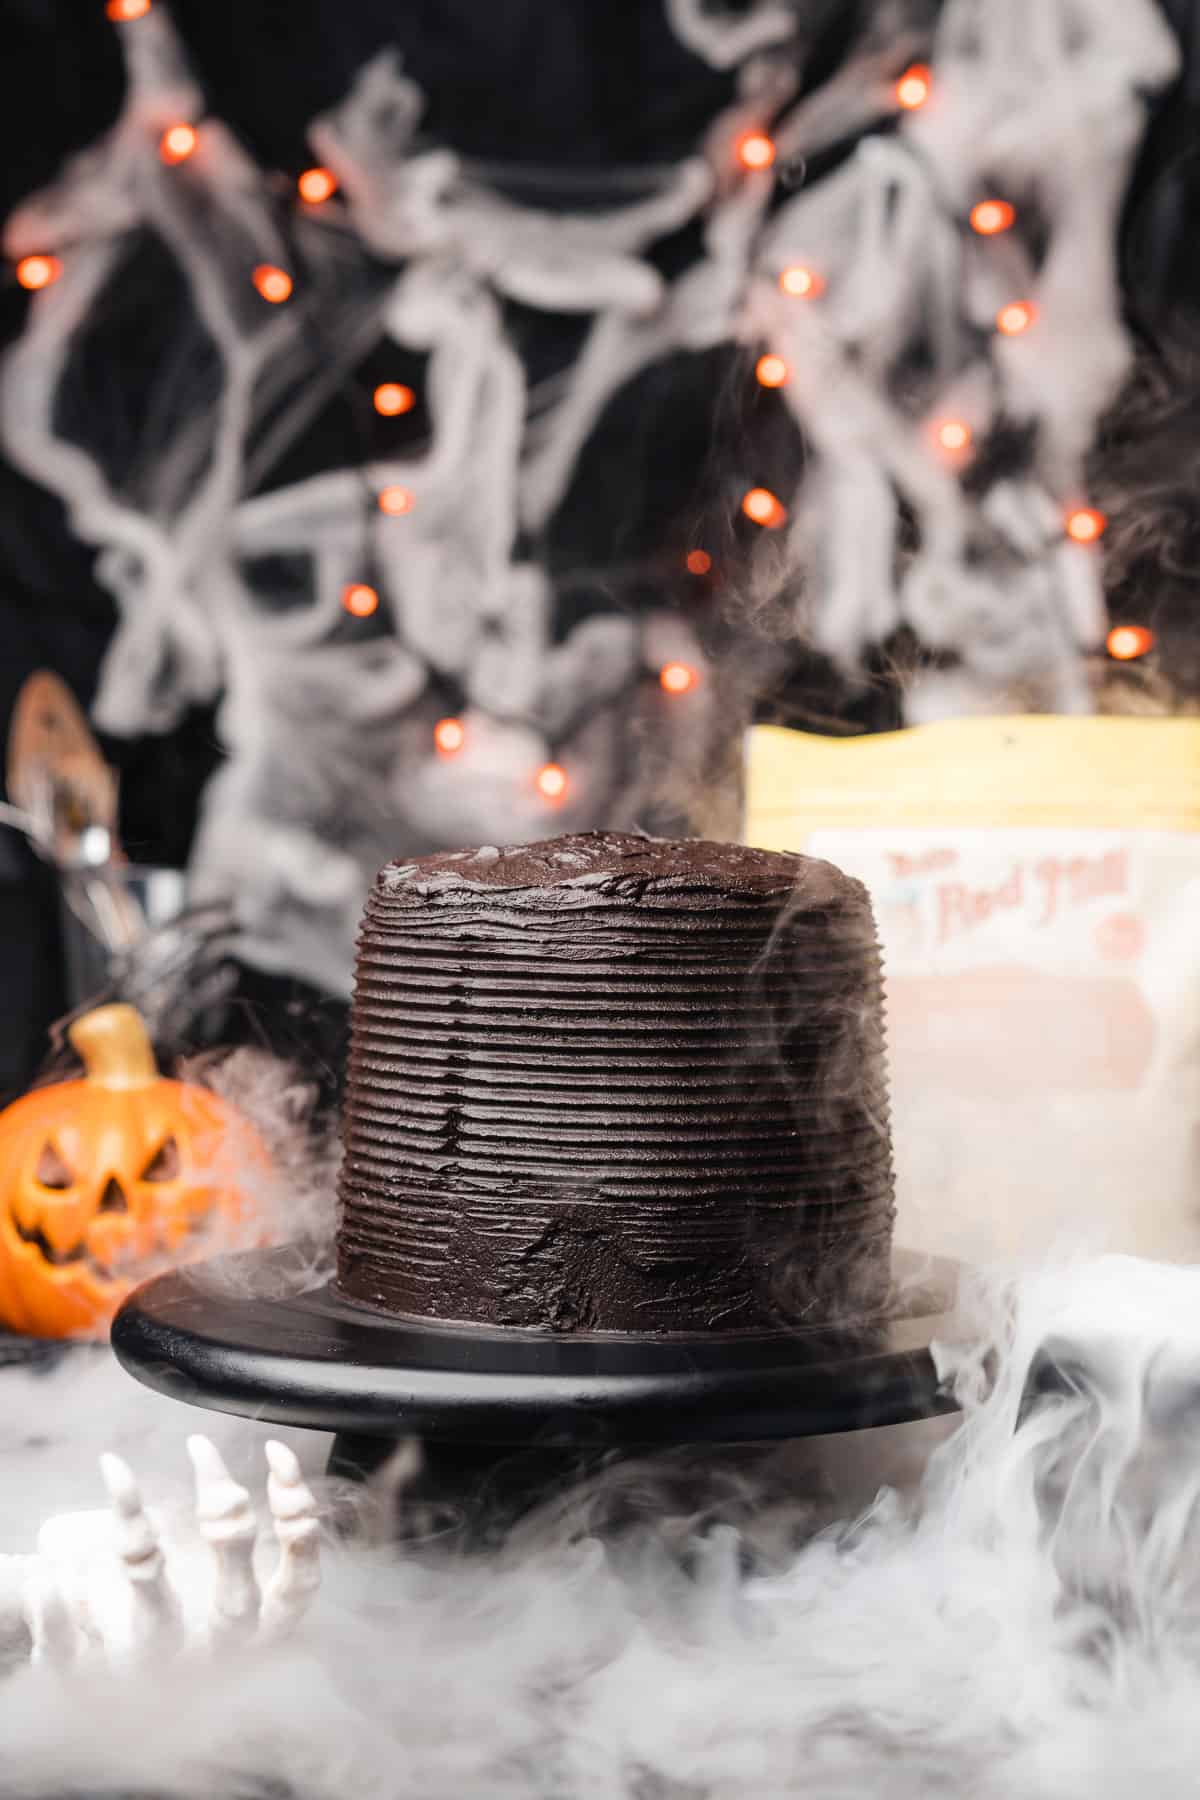 bob's red mill layered black velvet cake for halloween with dry ice fog and Halloween decor